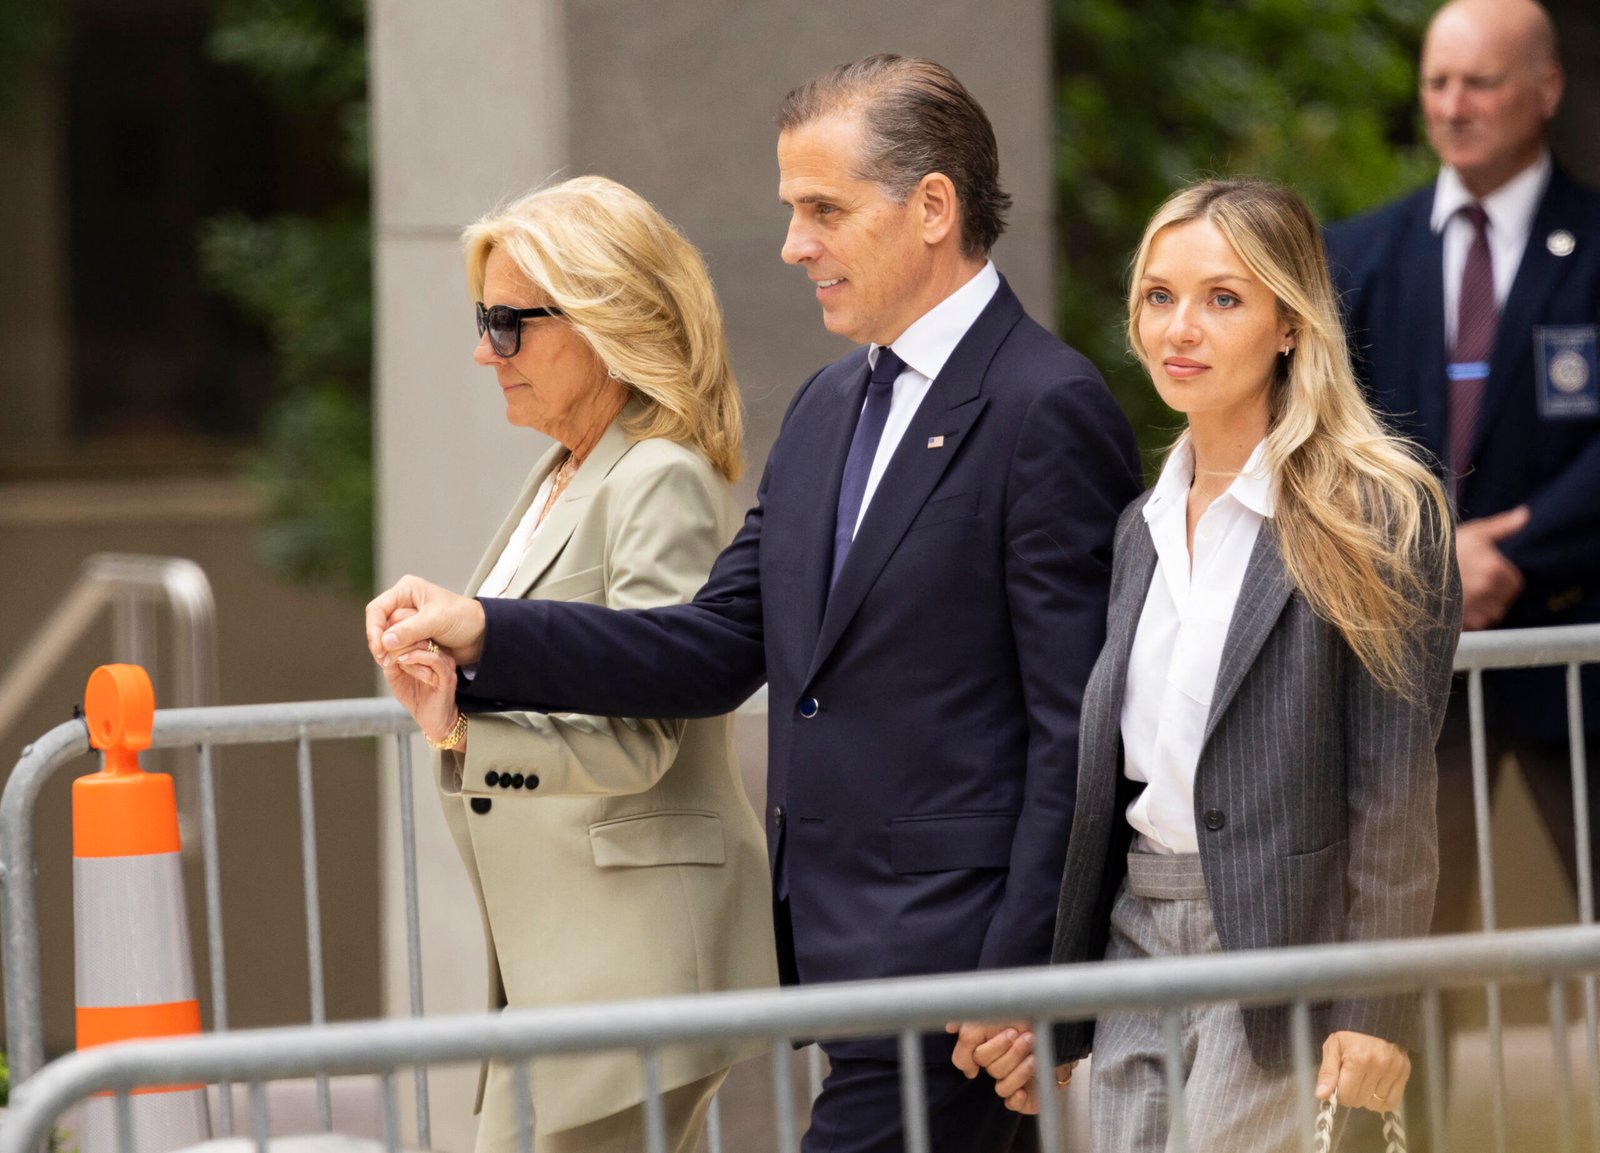 Jill Biden emerges as center of gravity for first family